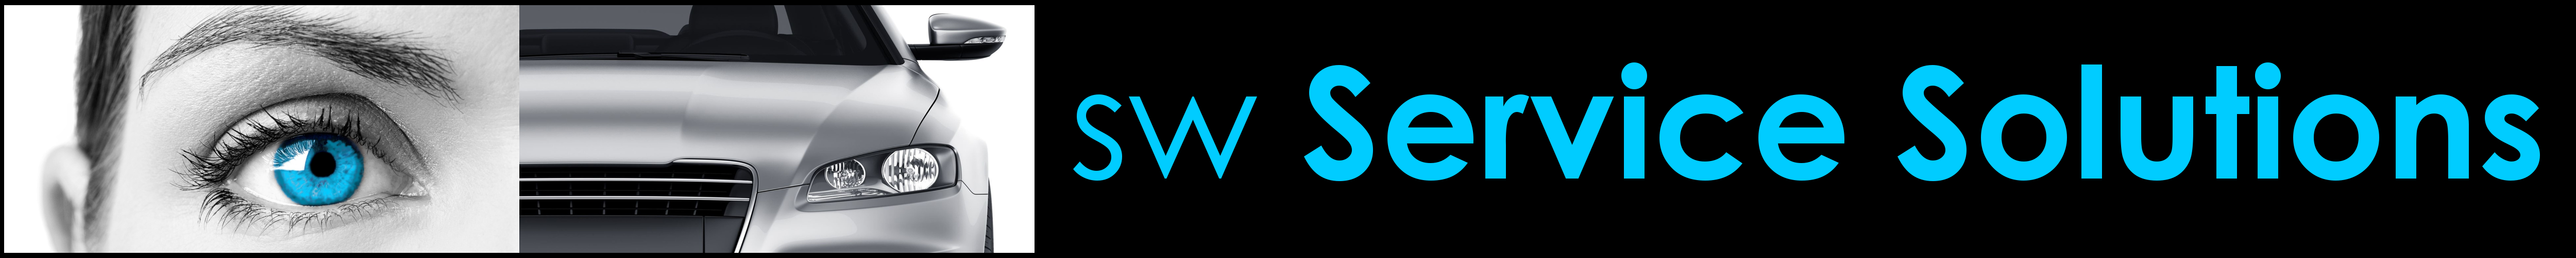 sw service Solutions logo